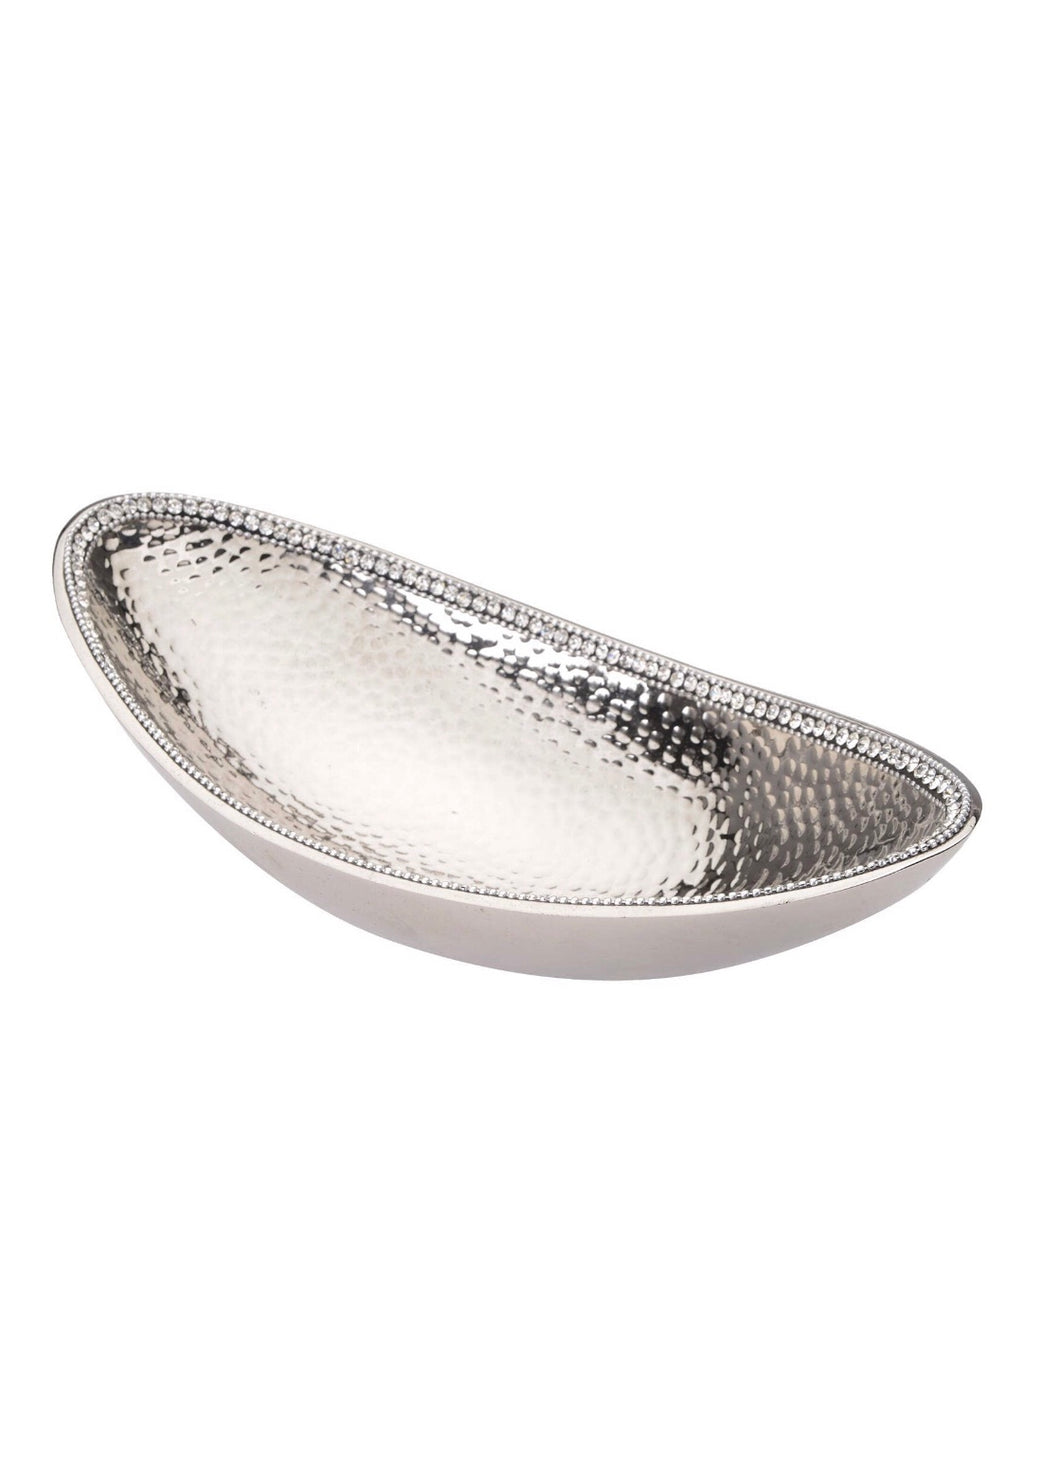 Stainless Steel Boat Bowl With Stones